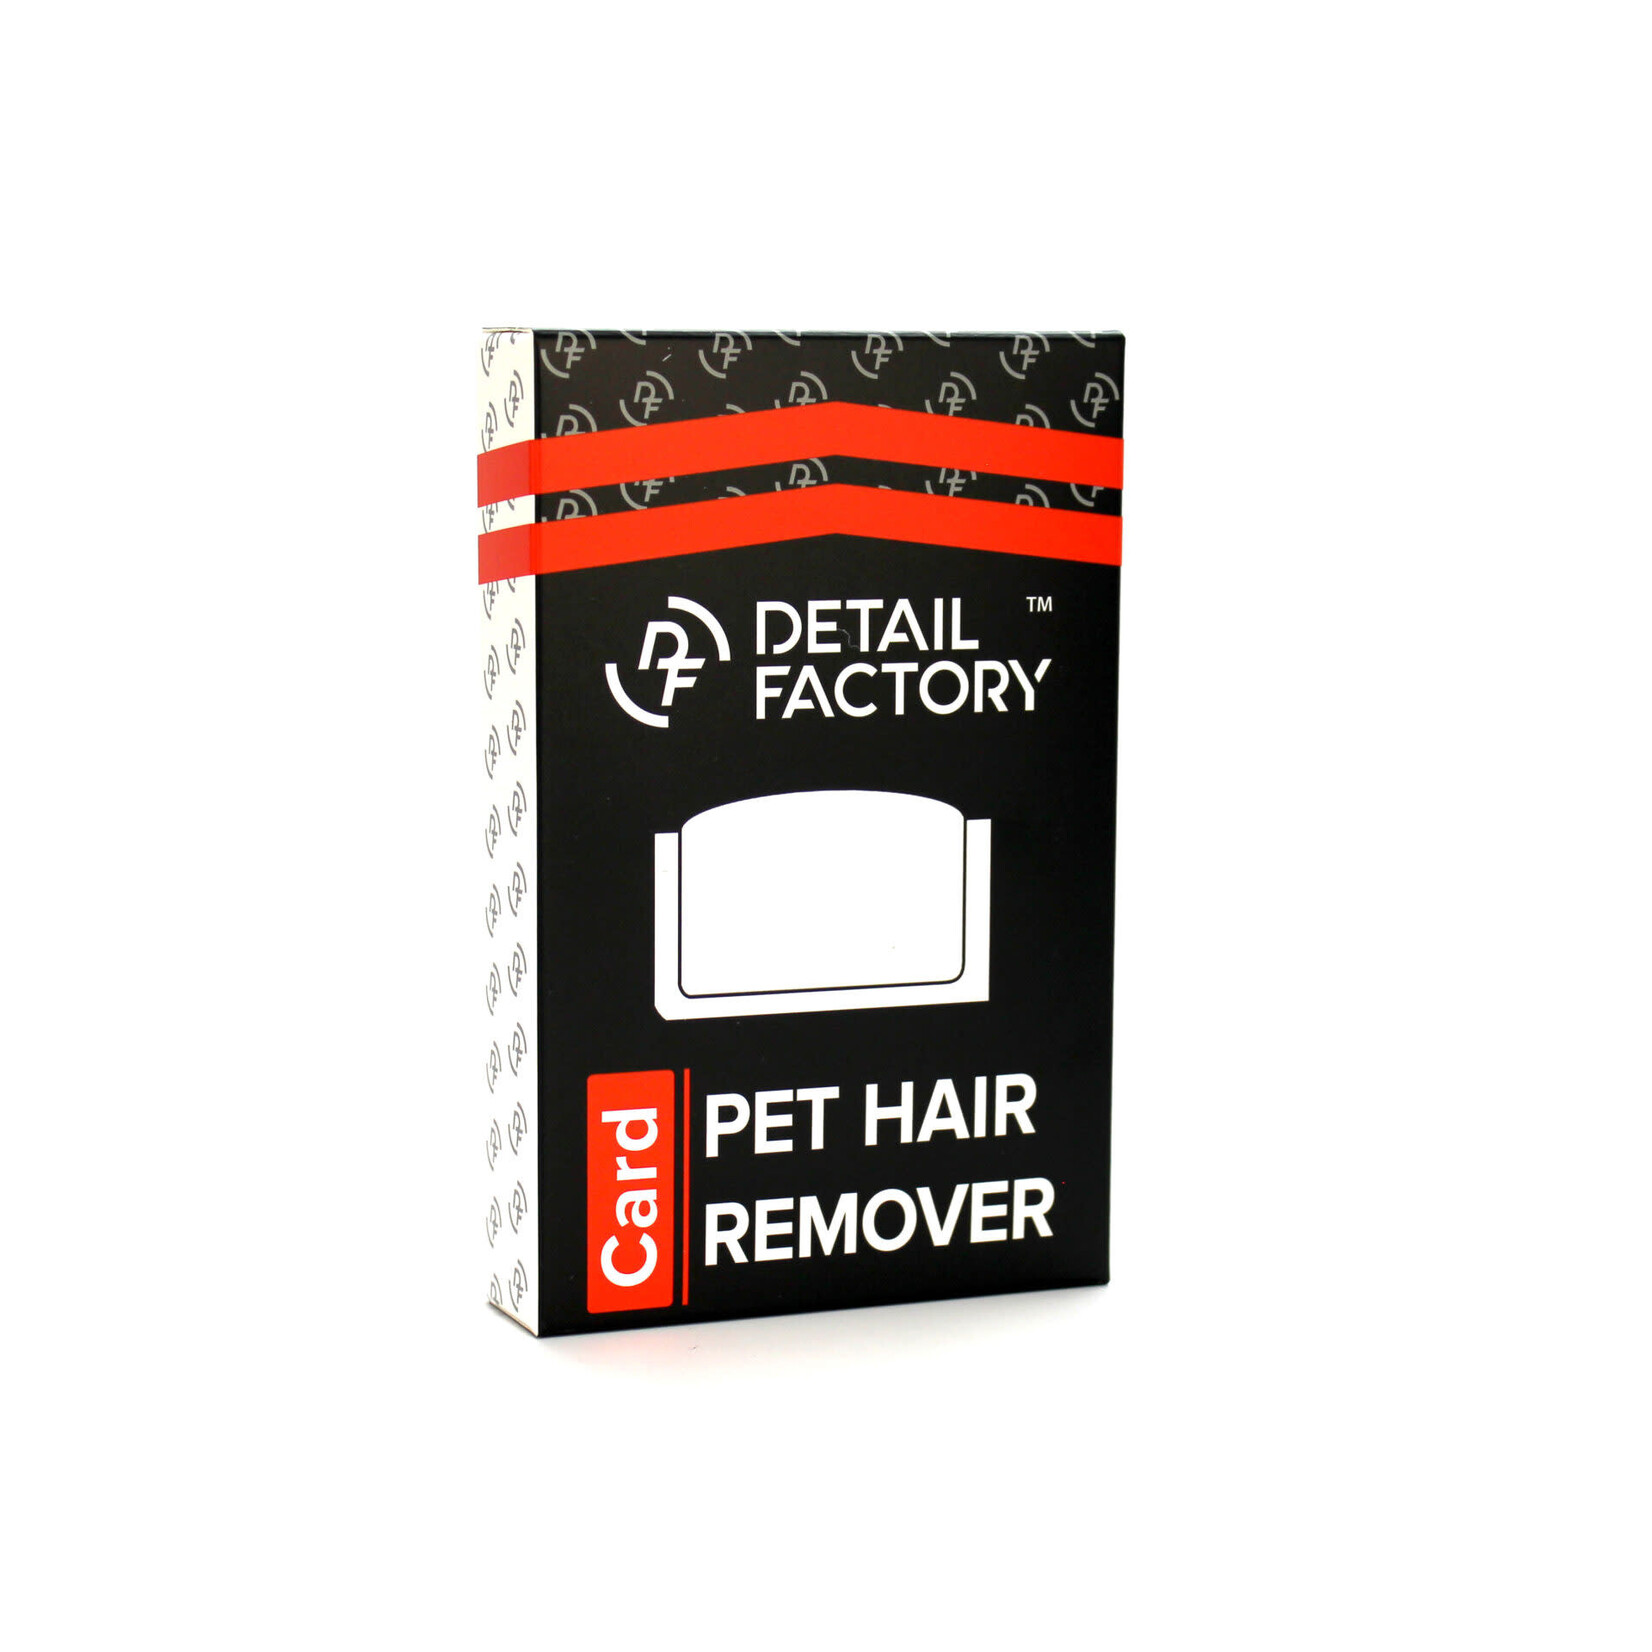 The Rag Company Detail Factory - Pet Hair Remover Card